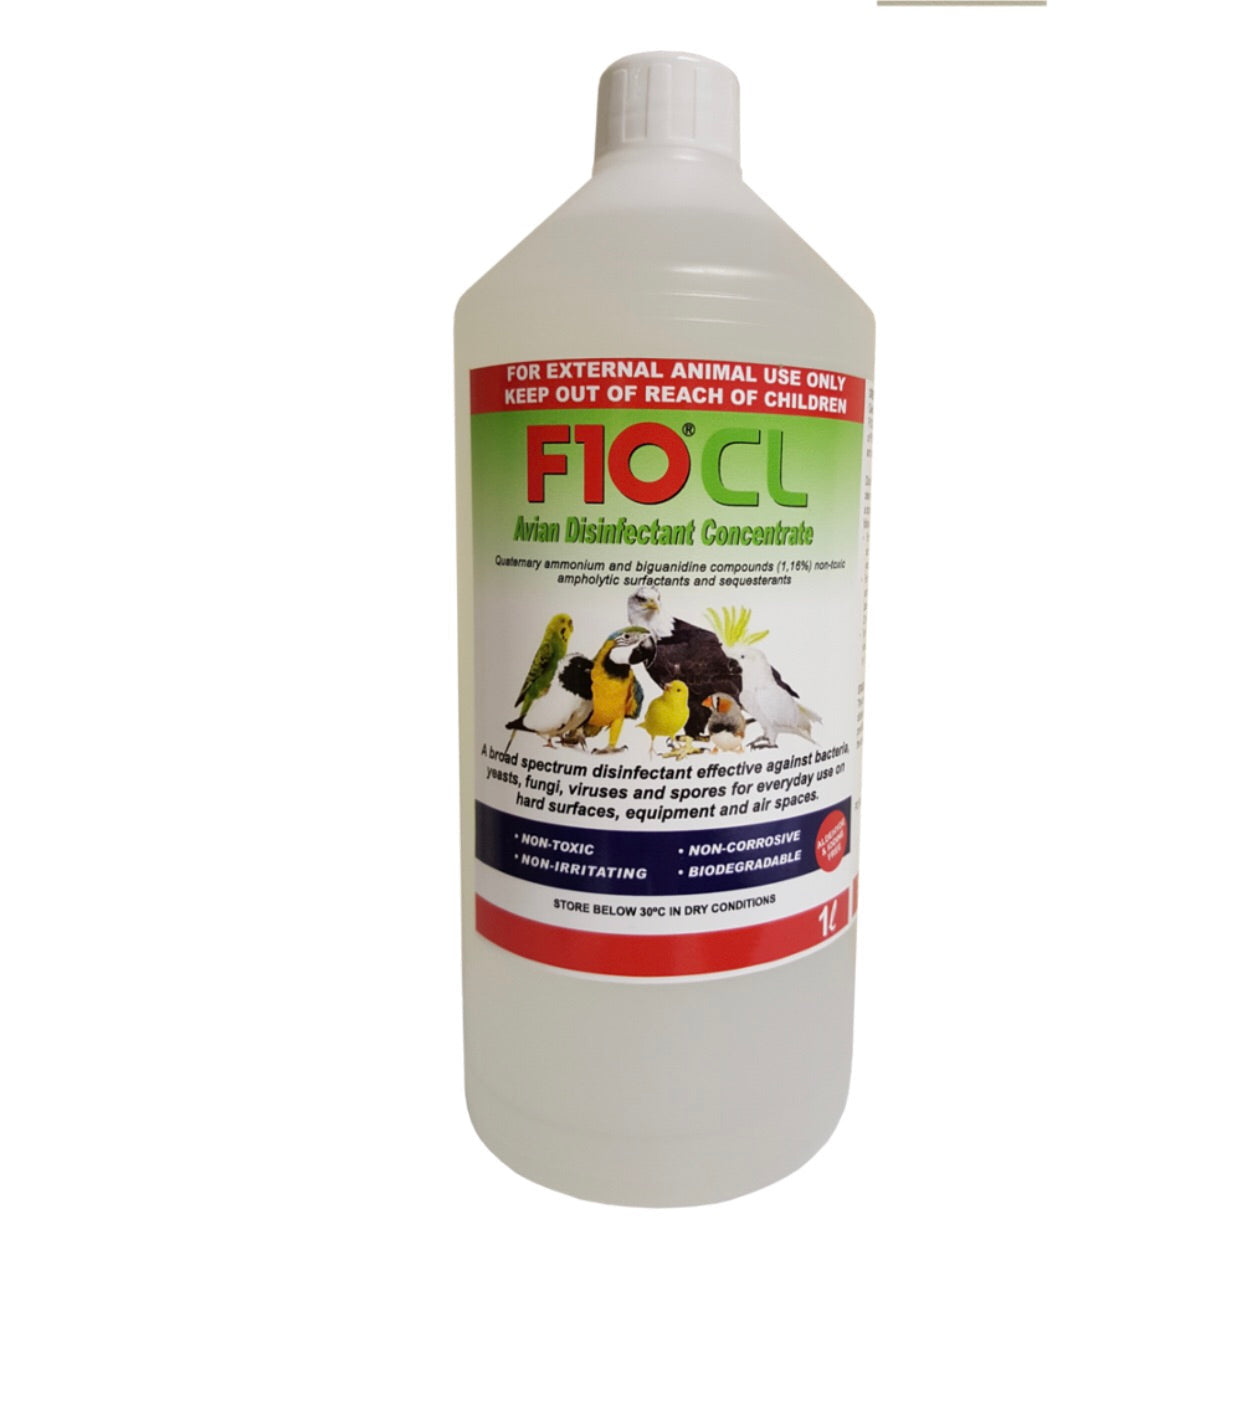 F10CL Avian Disinfectant Concentrate